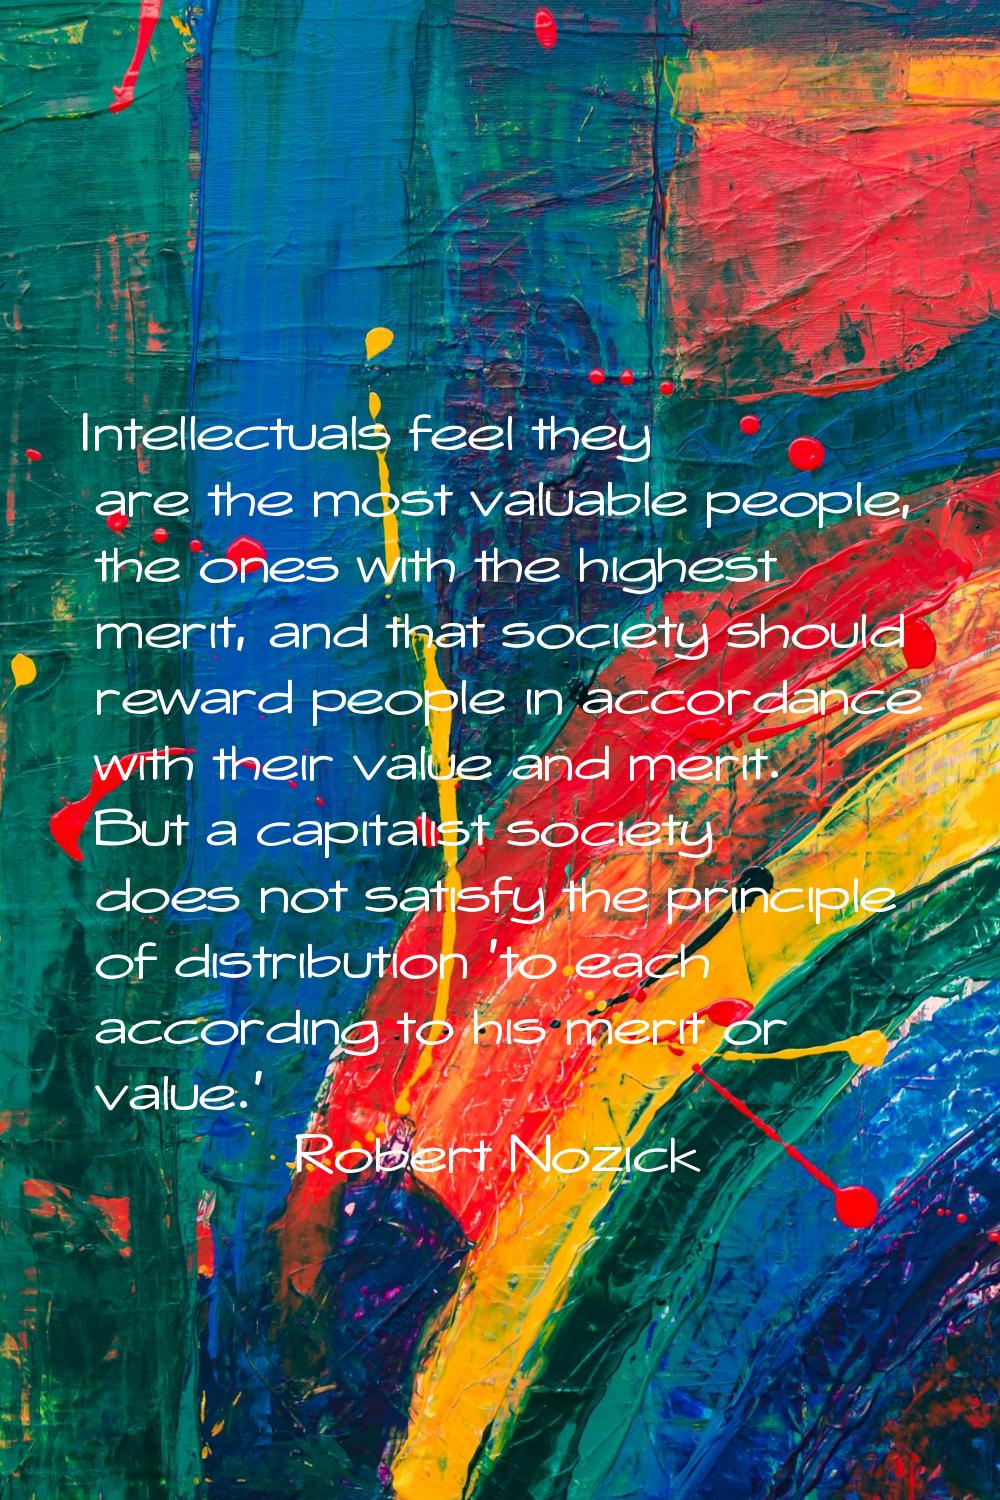 Intellectuals feel they are the most valuable people, the ones with the highest merit, and that soc